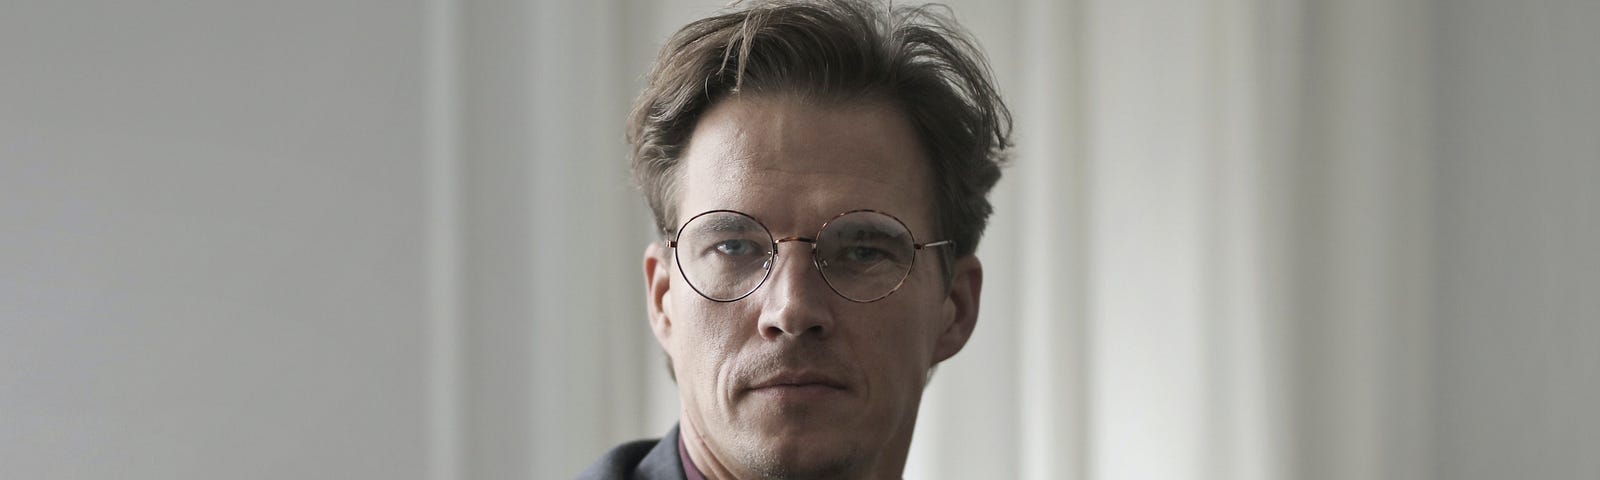 A mature man with glasses looks in front of a camera